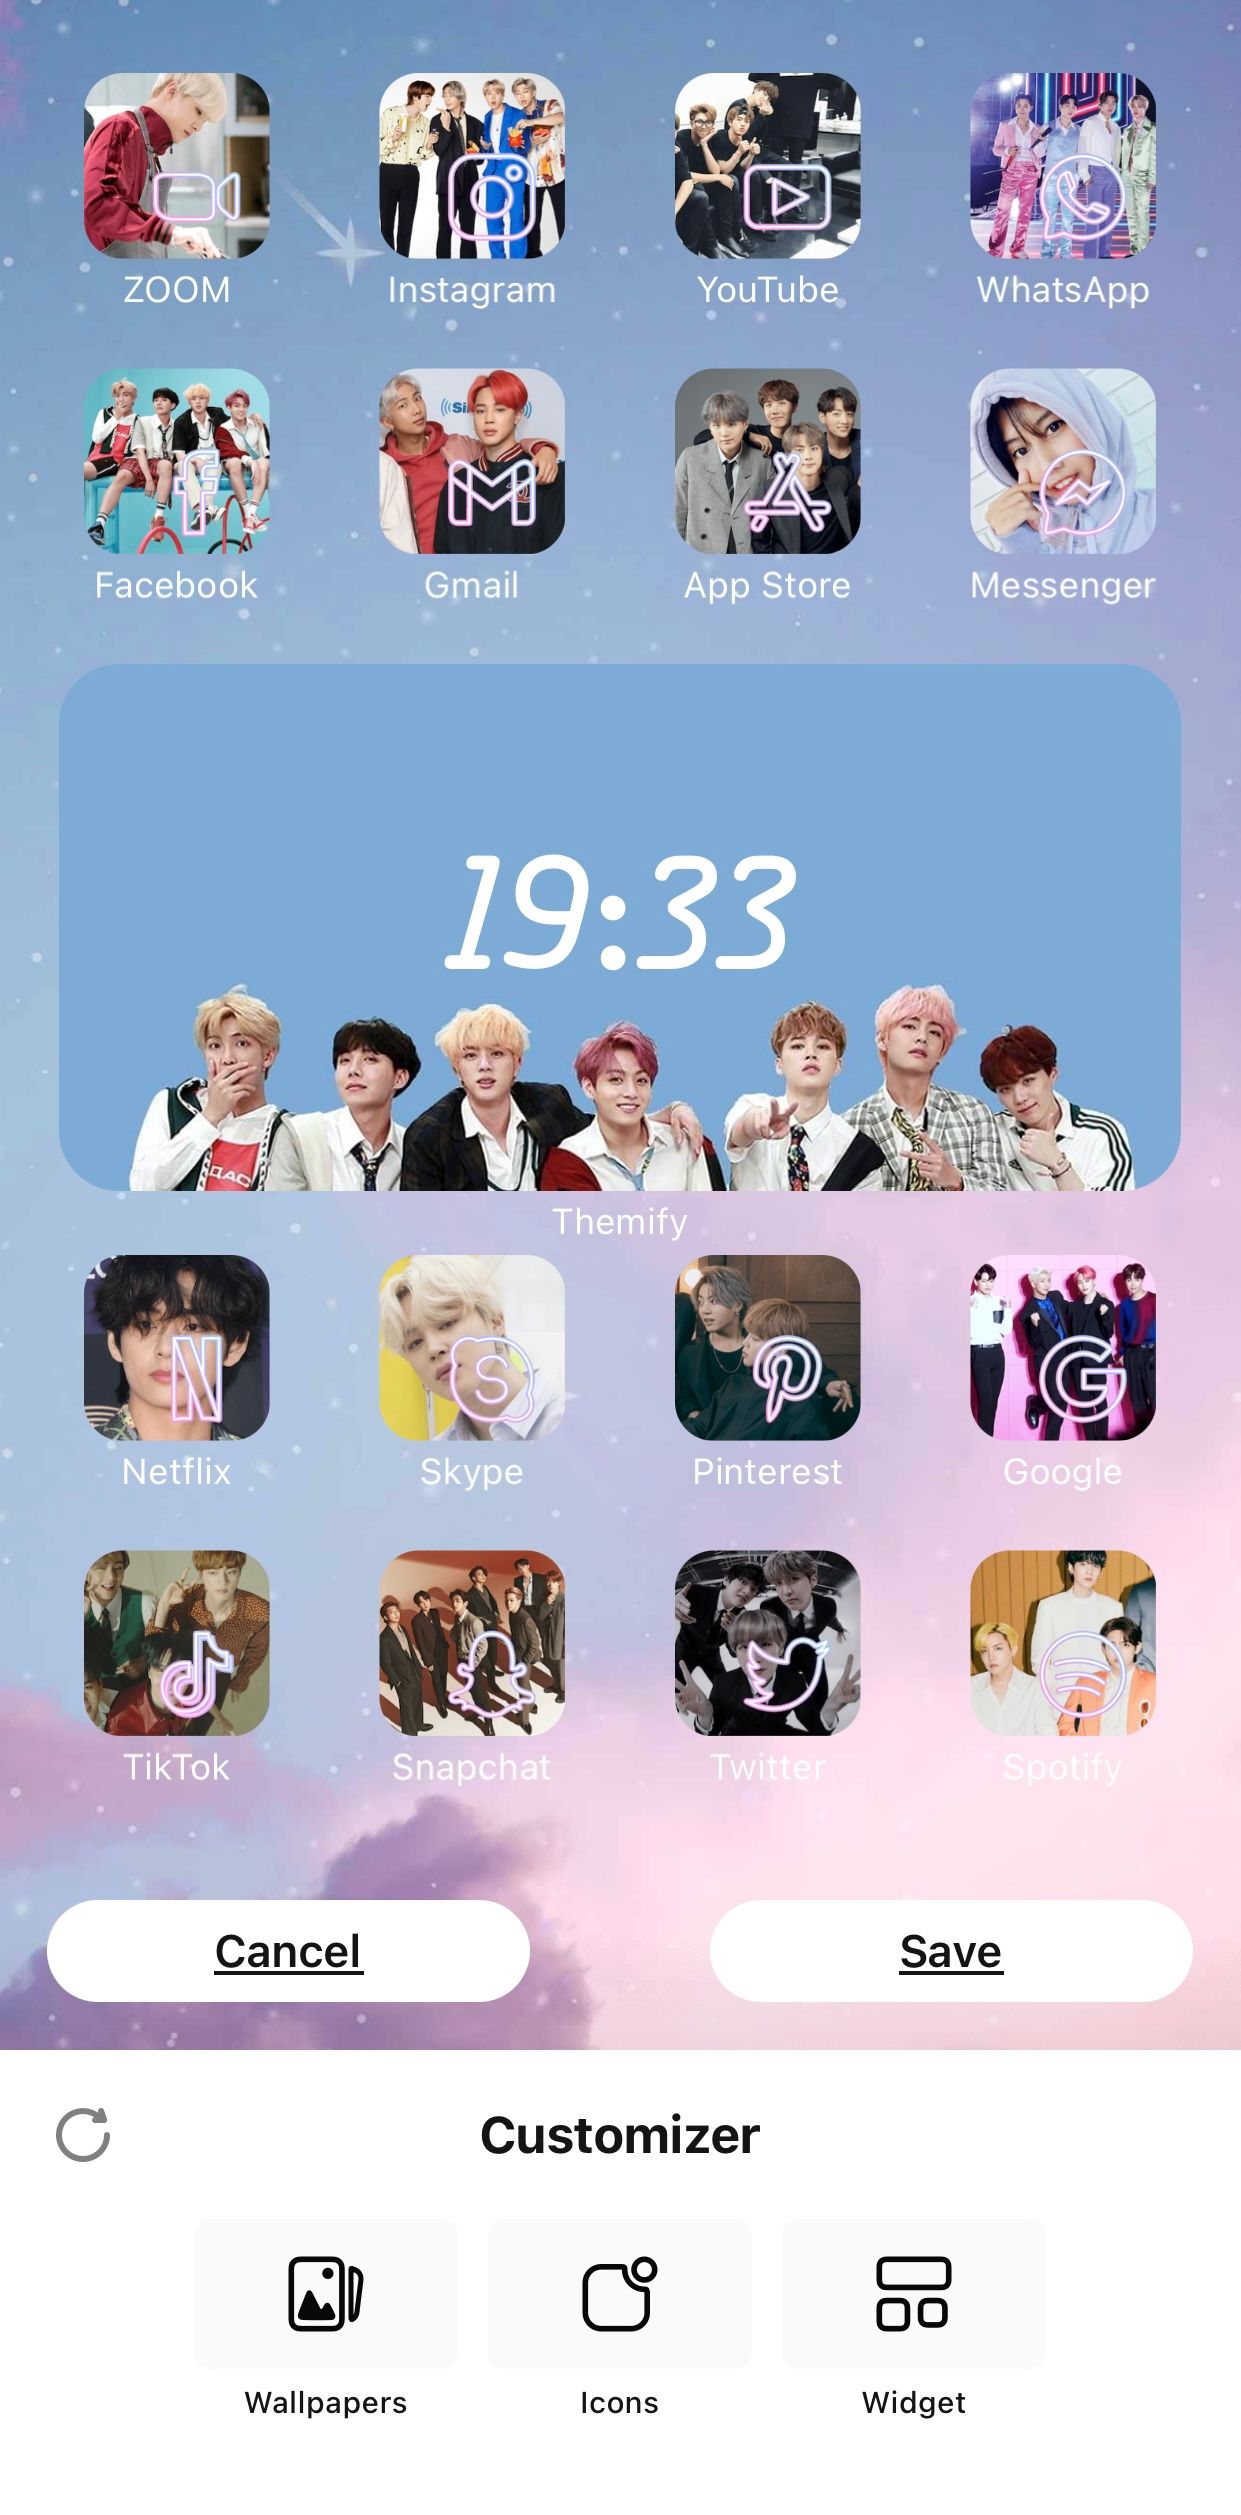 Themify customizer for BTS themed icons and widget